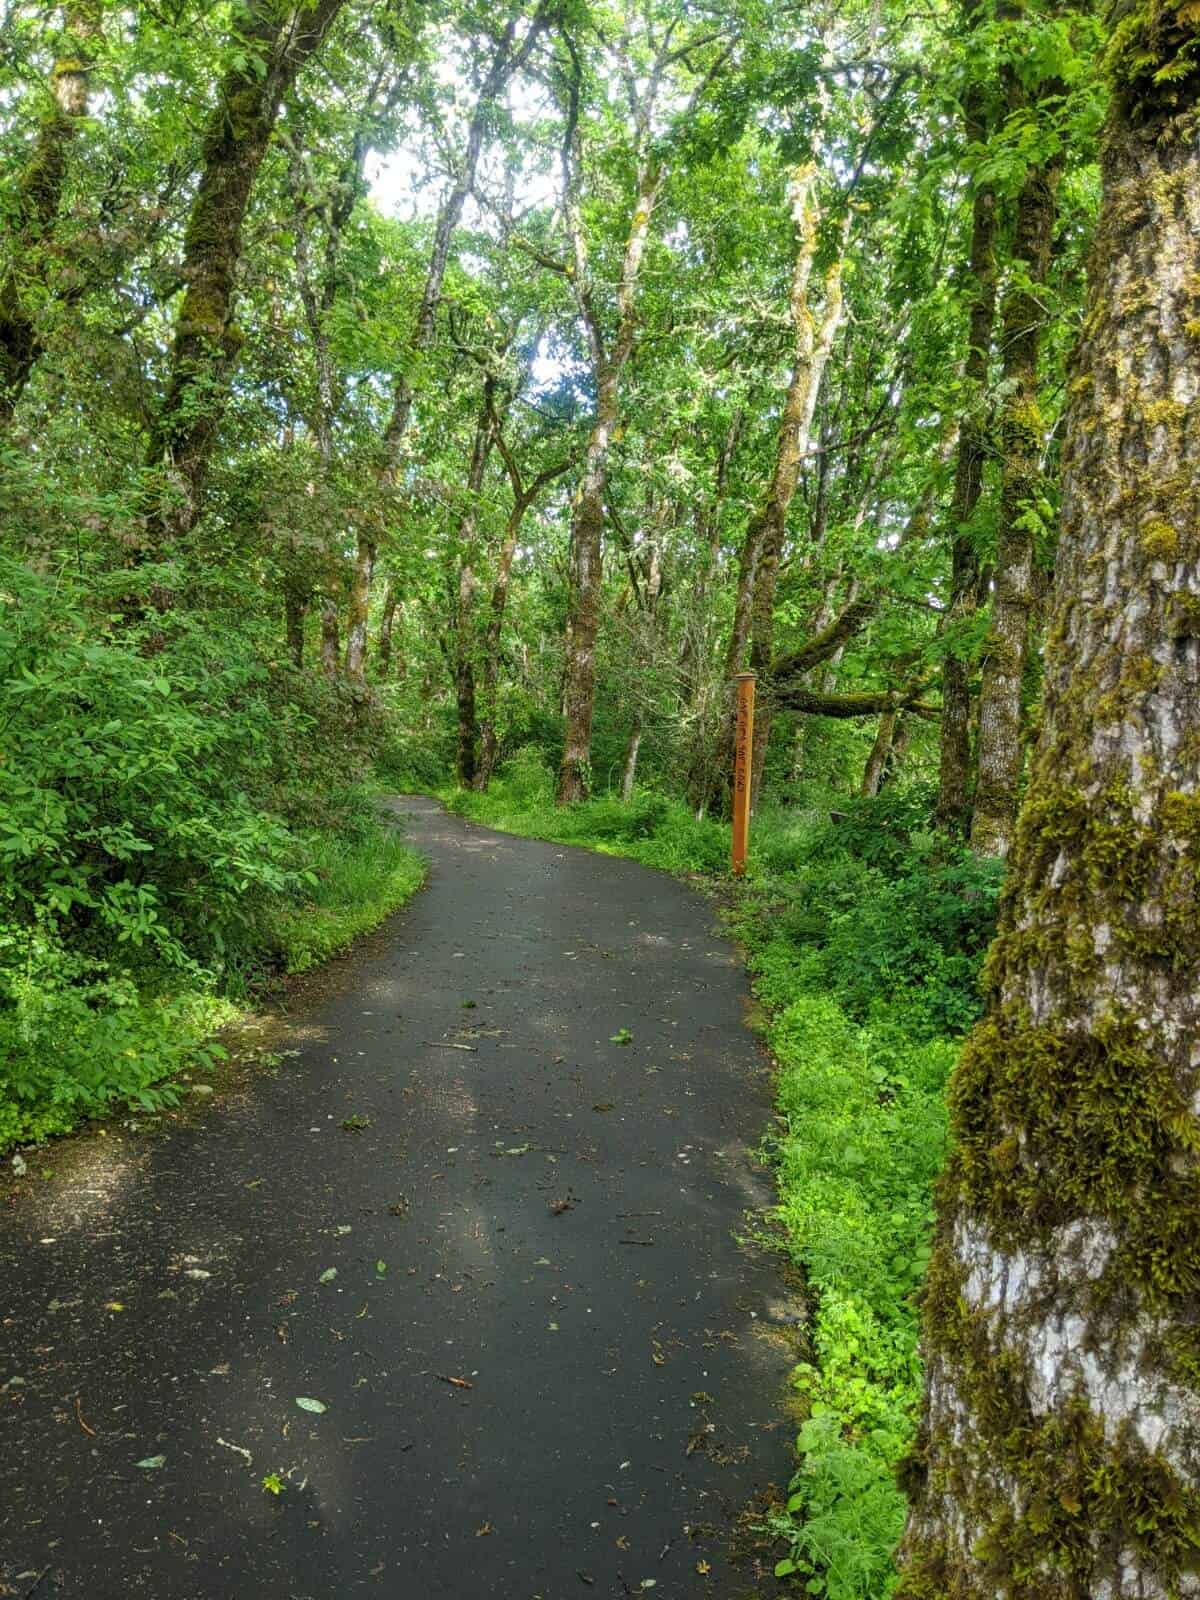 A paved footpath through a green forest in the Willamette Valley